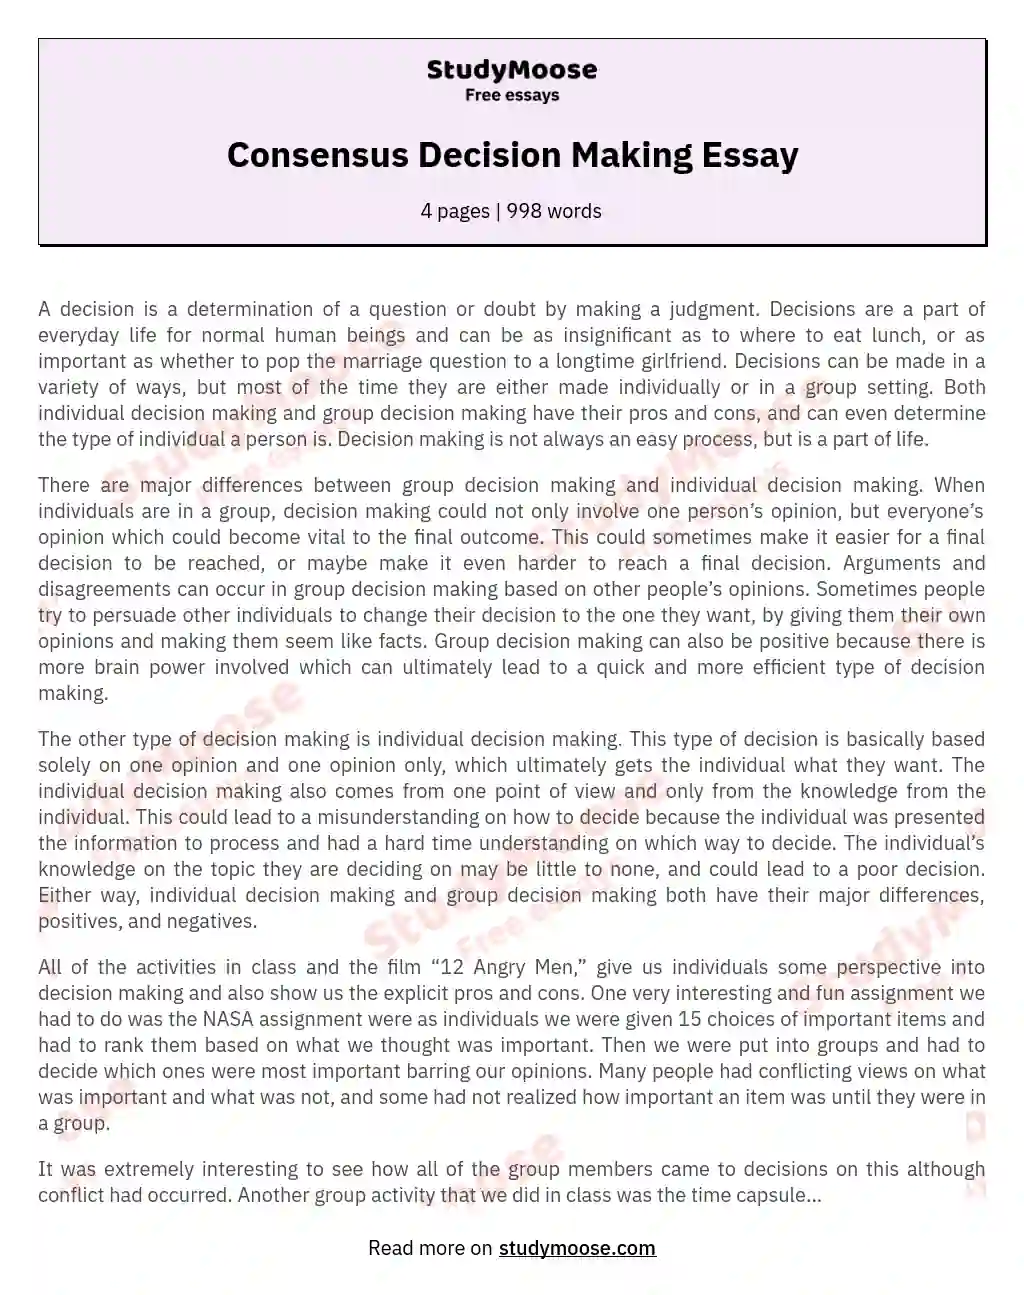 realization about decision making essay